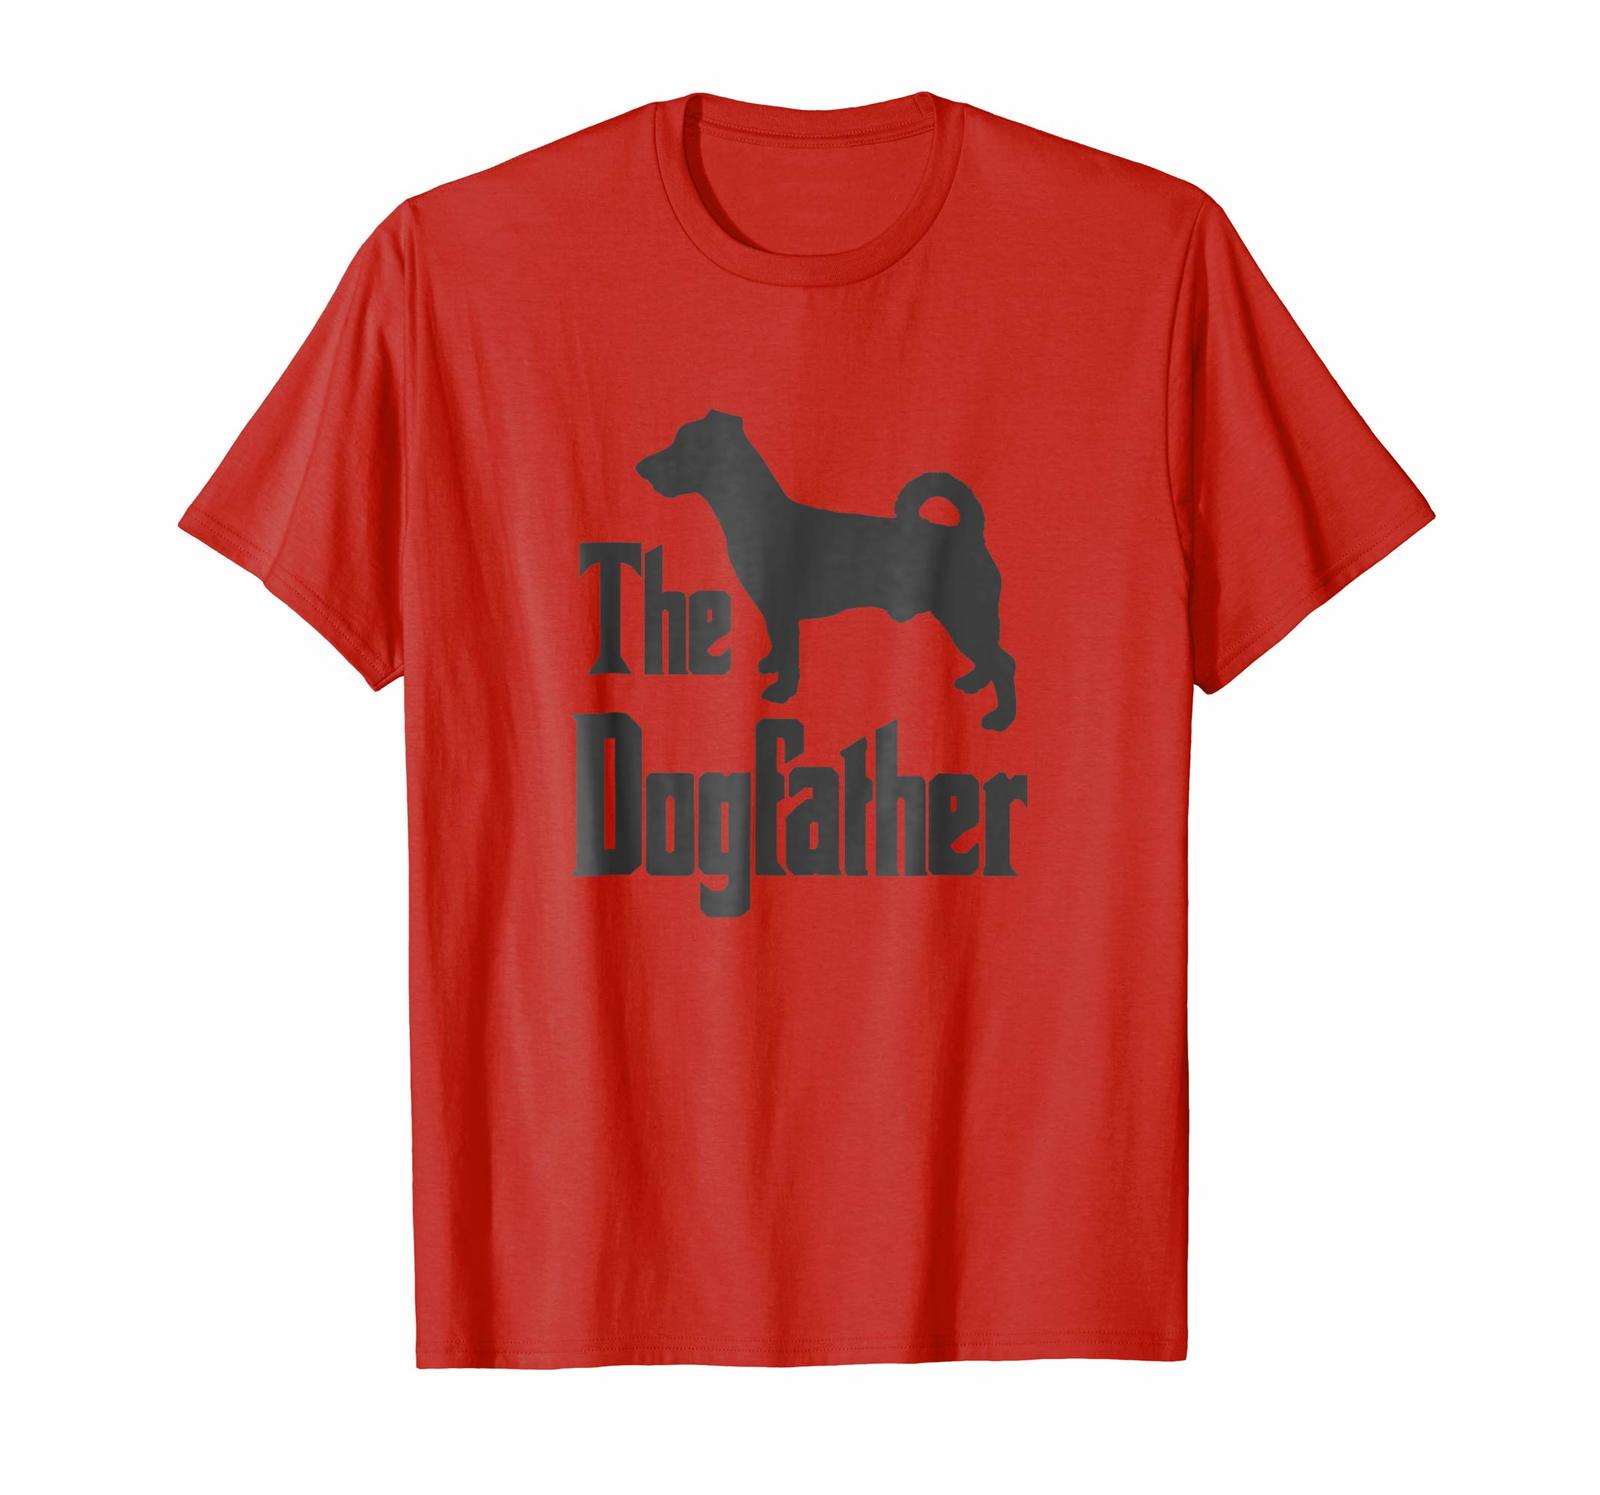 Brand Dog - Dog fashion - the dogfather t-shirt jack russell silhouette funny dog men